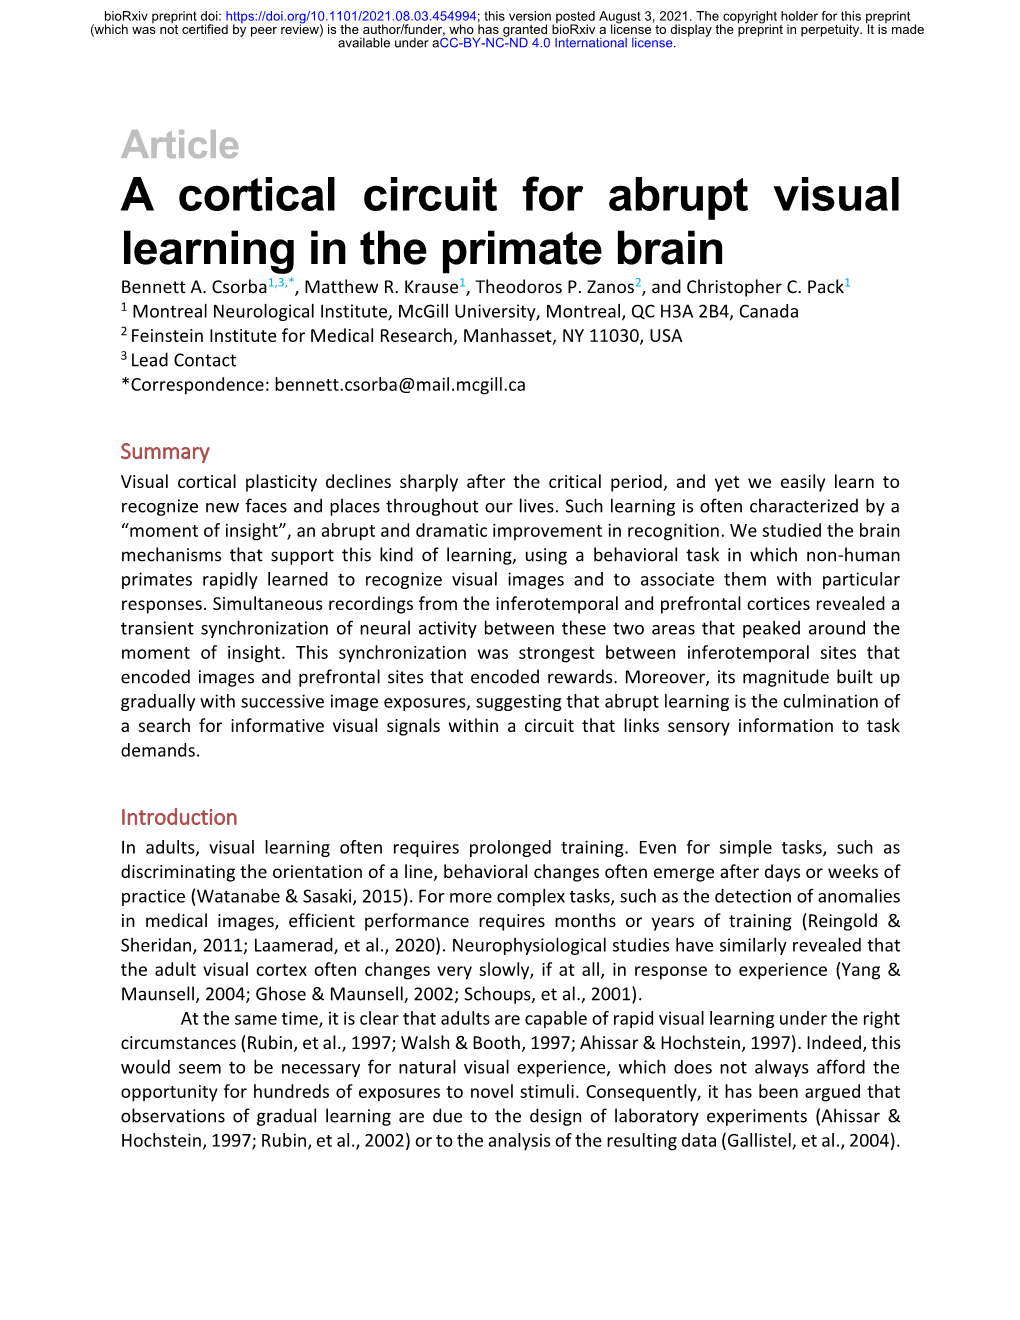 A Cortical Circuit for Abrupt Visual Learning in the Primate Brain